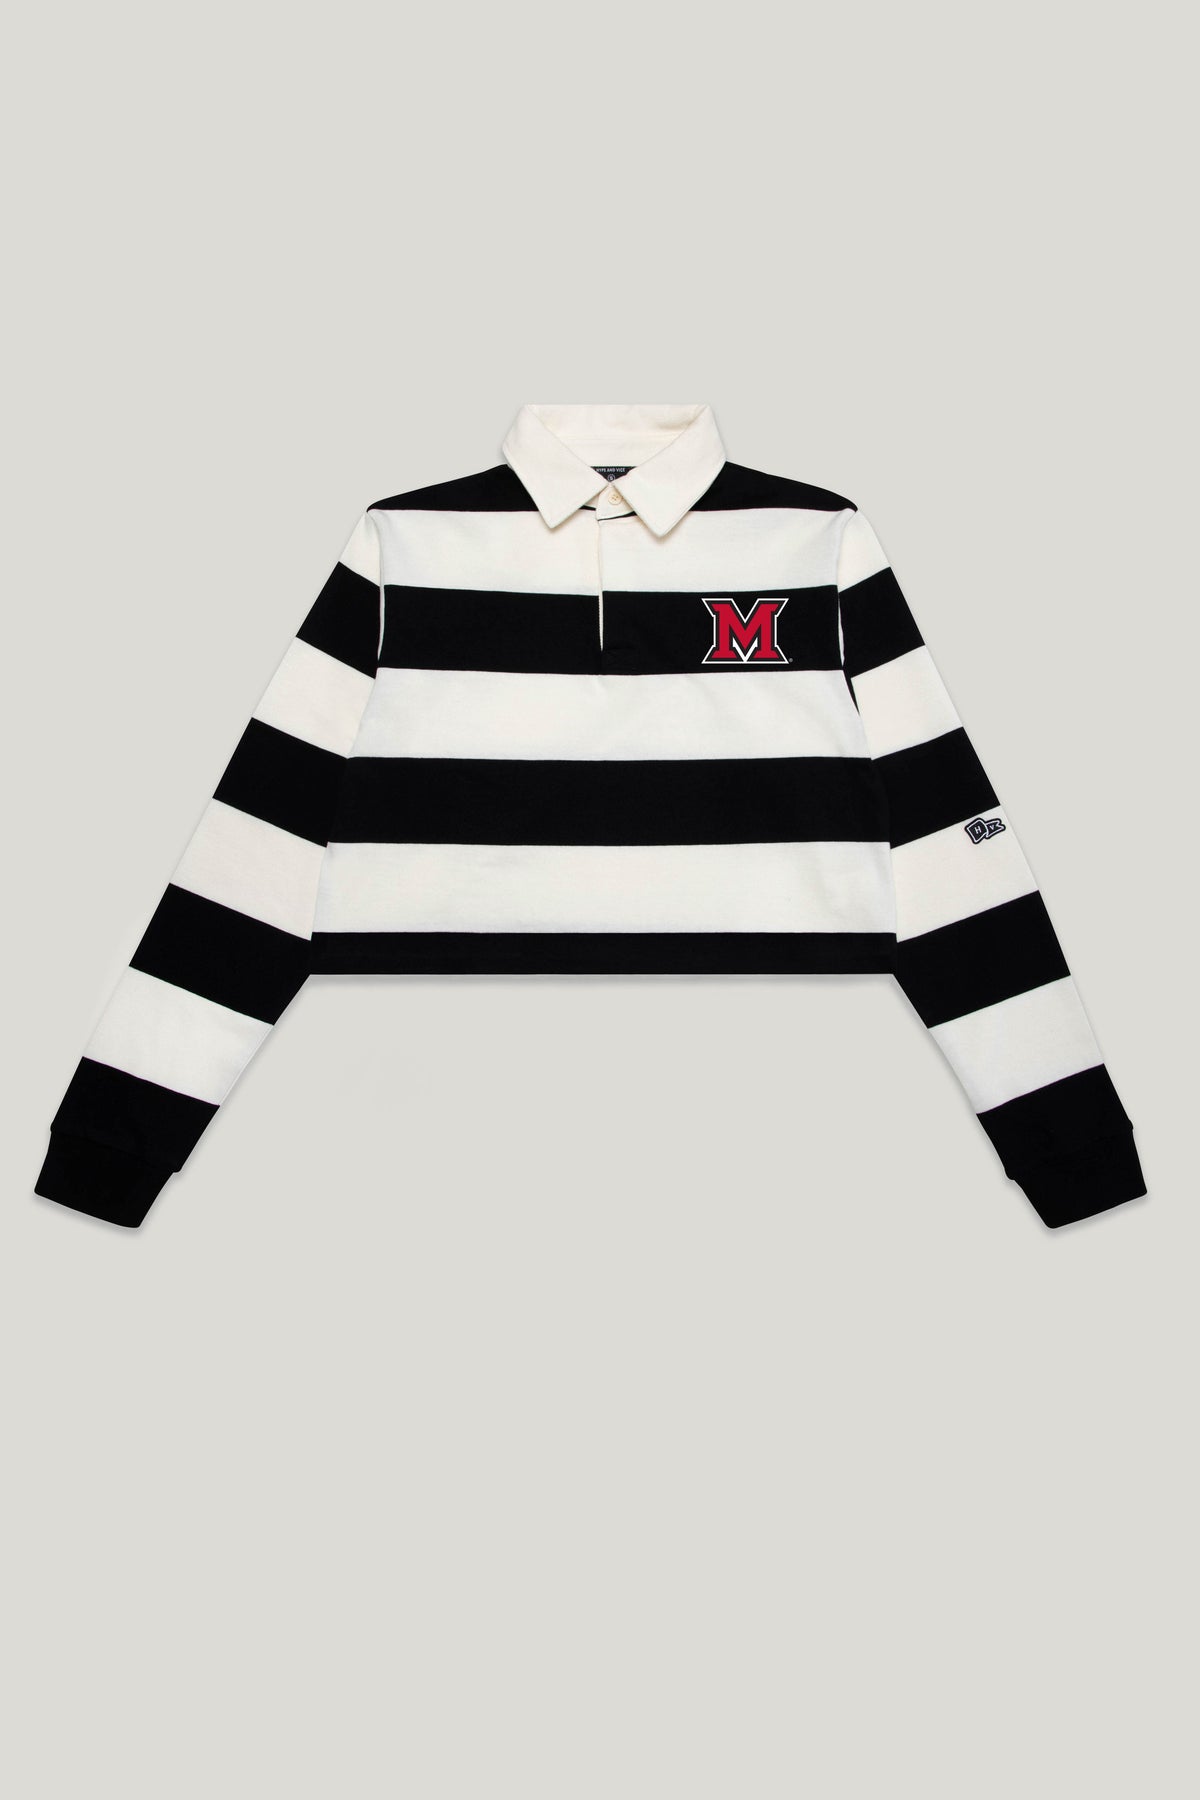 Miami University Rugby Top